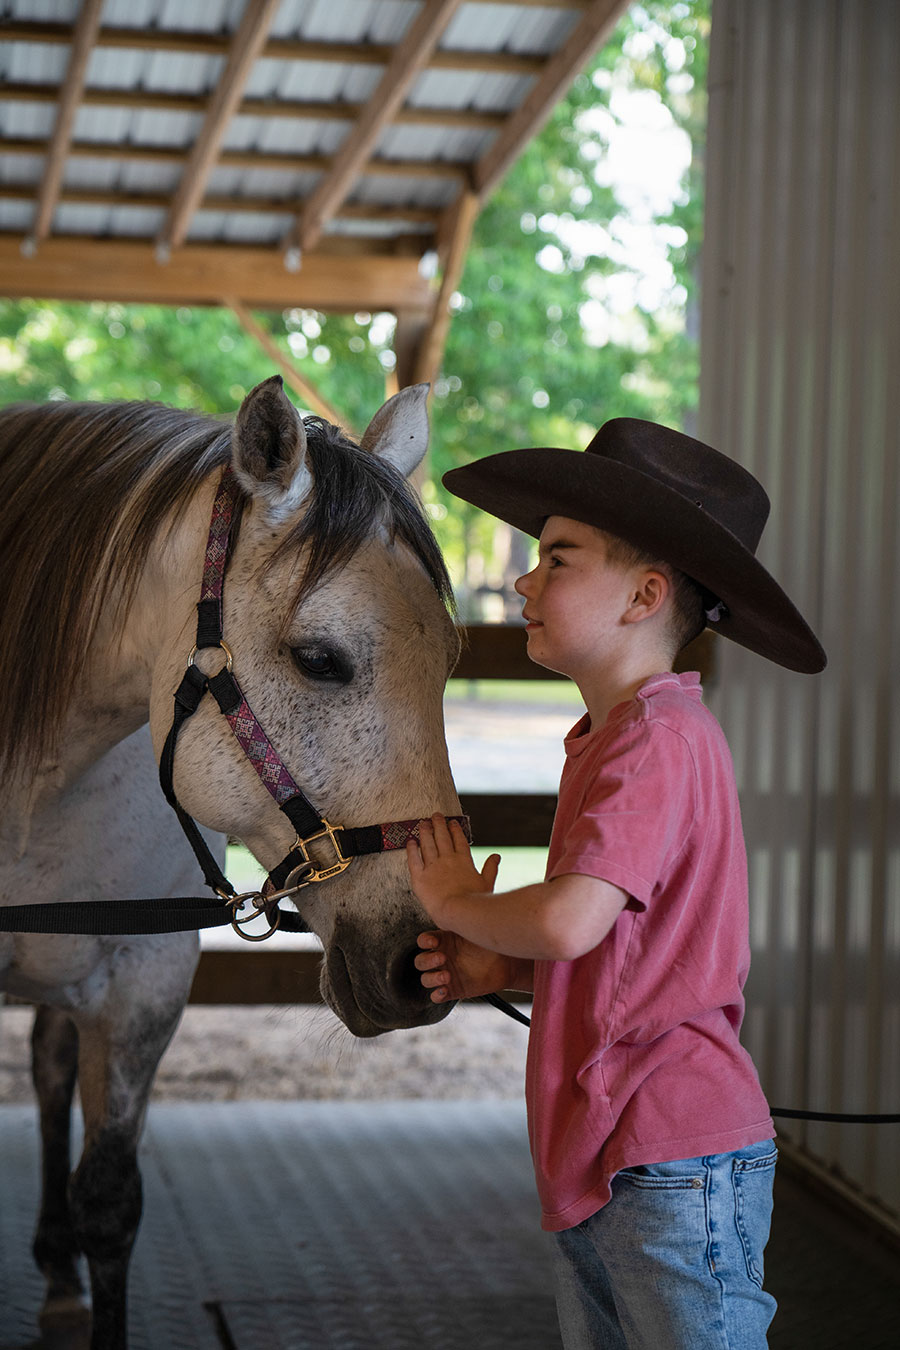 Photo of Leighton, a rider talking to RJ, a horse at Faith Equestrian Therapeutic Center